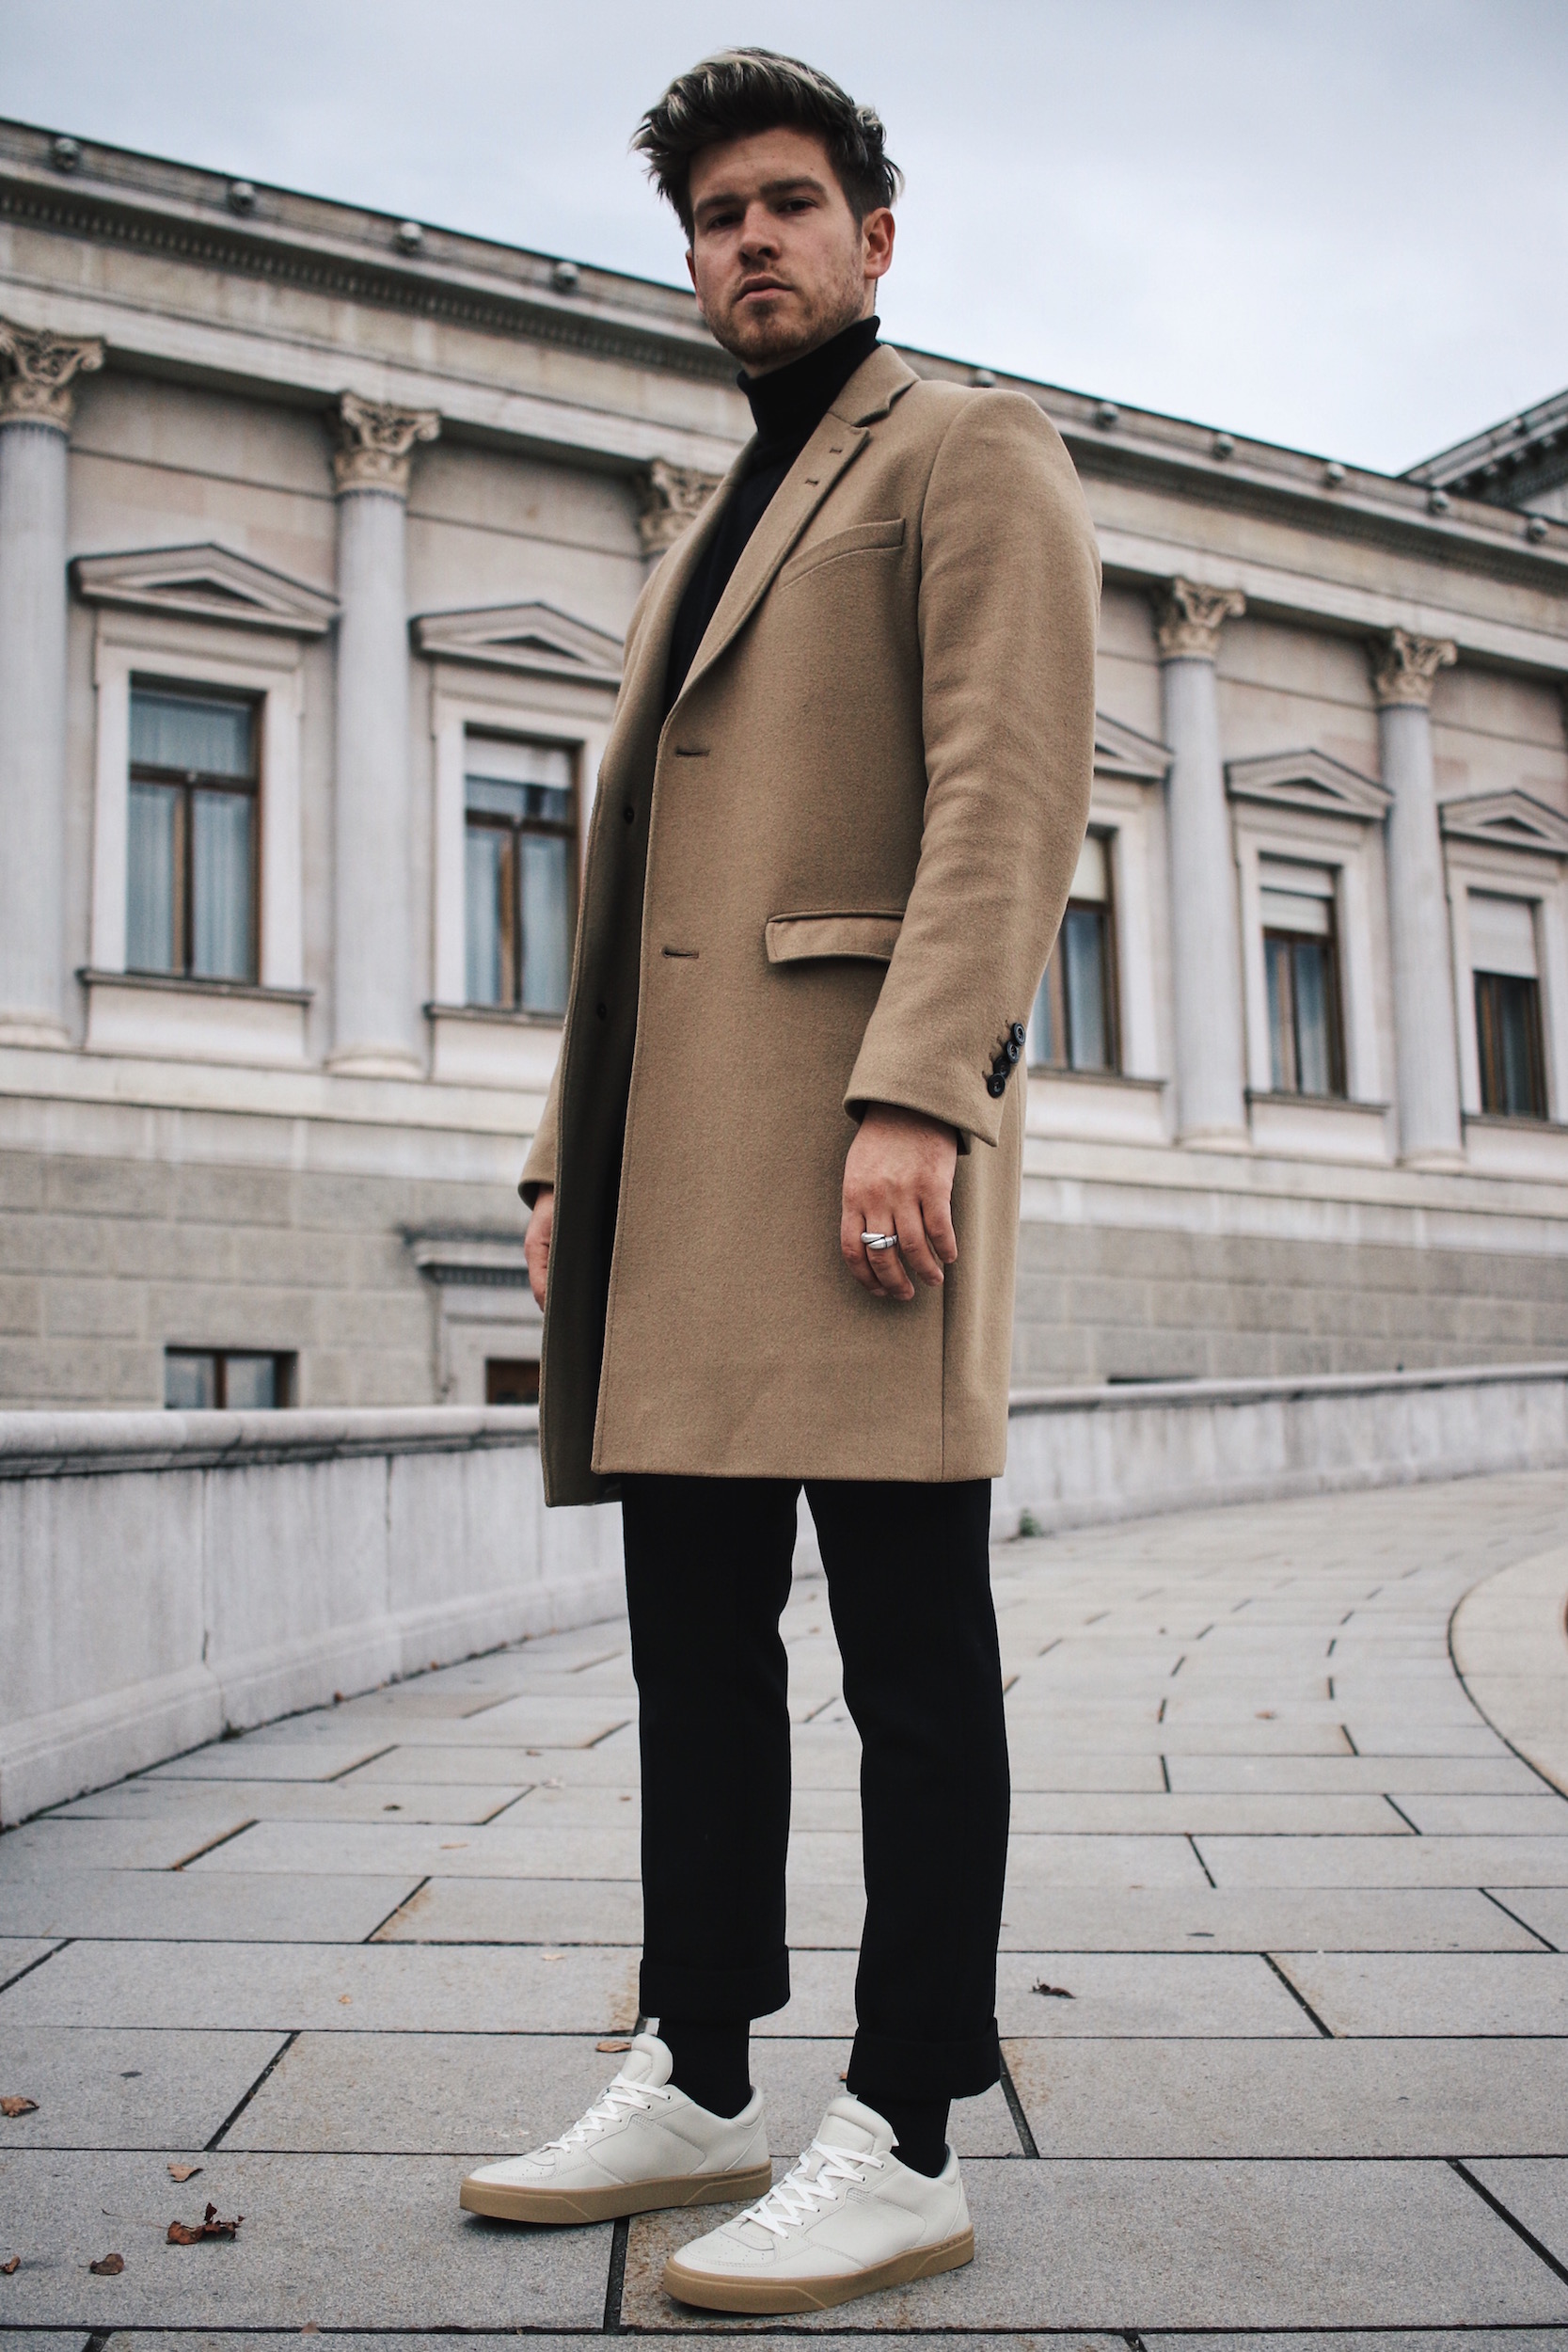 Tiger of Sweden Camel Coat_Turtleneck Sweater_All Black_VOR Shoes_Outfit by Meanwhile in Awesometown_Austrian Mens Fashion and Lifestyle Blogger 4